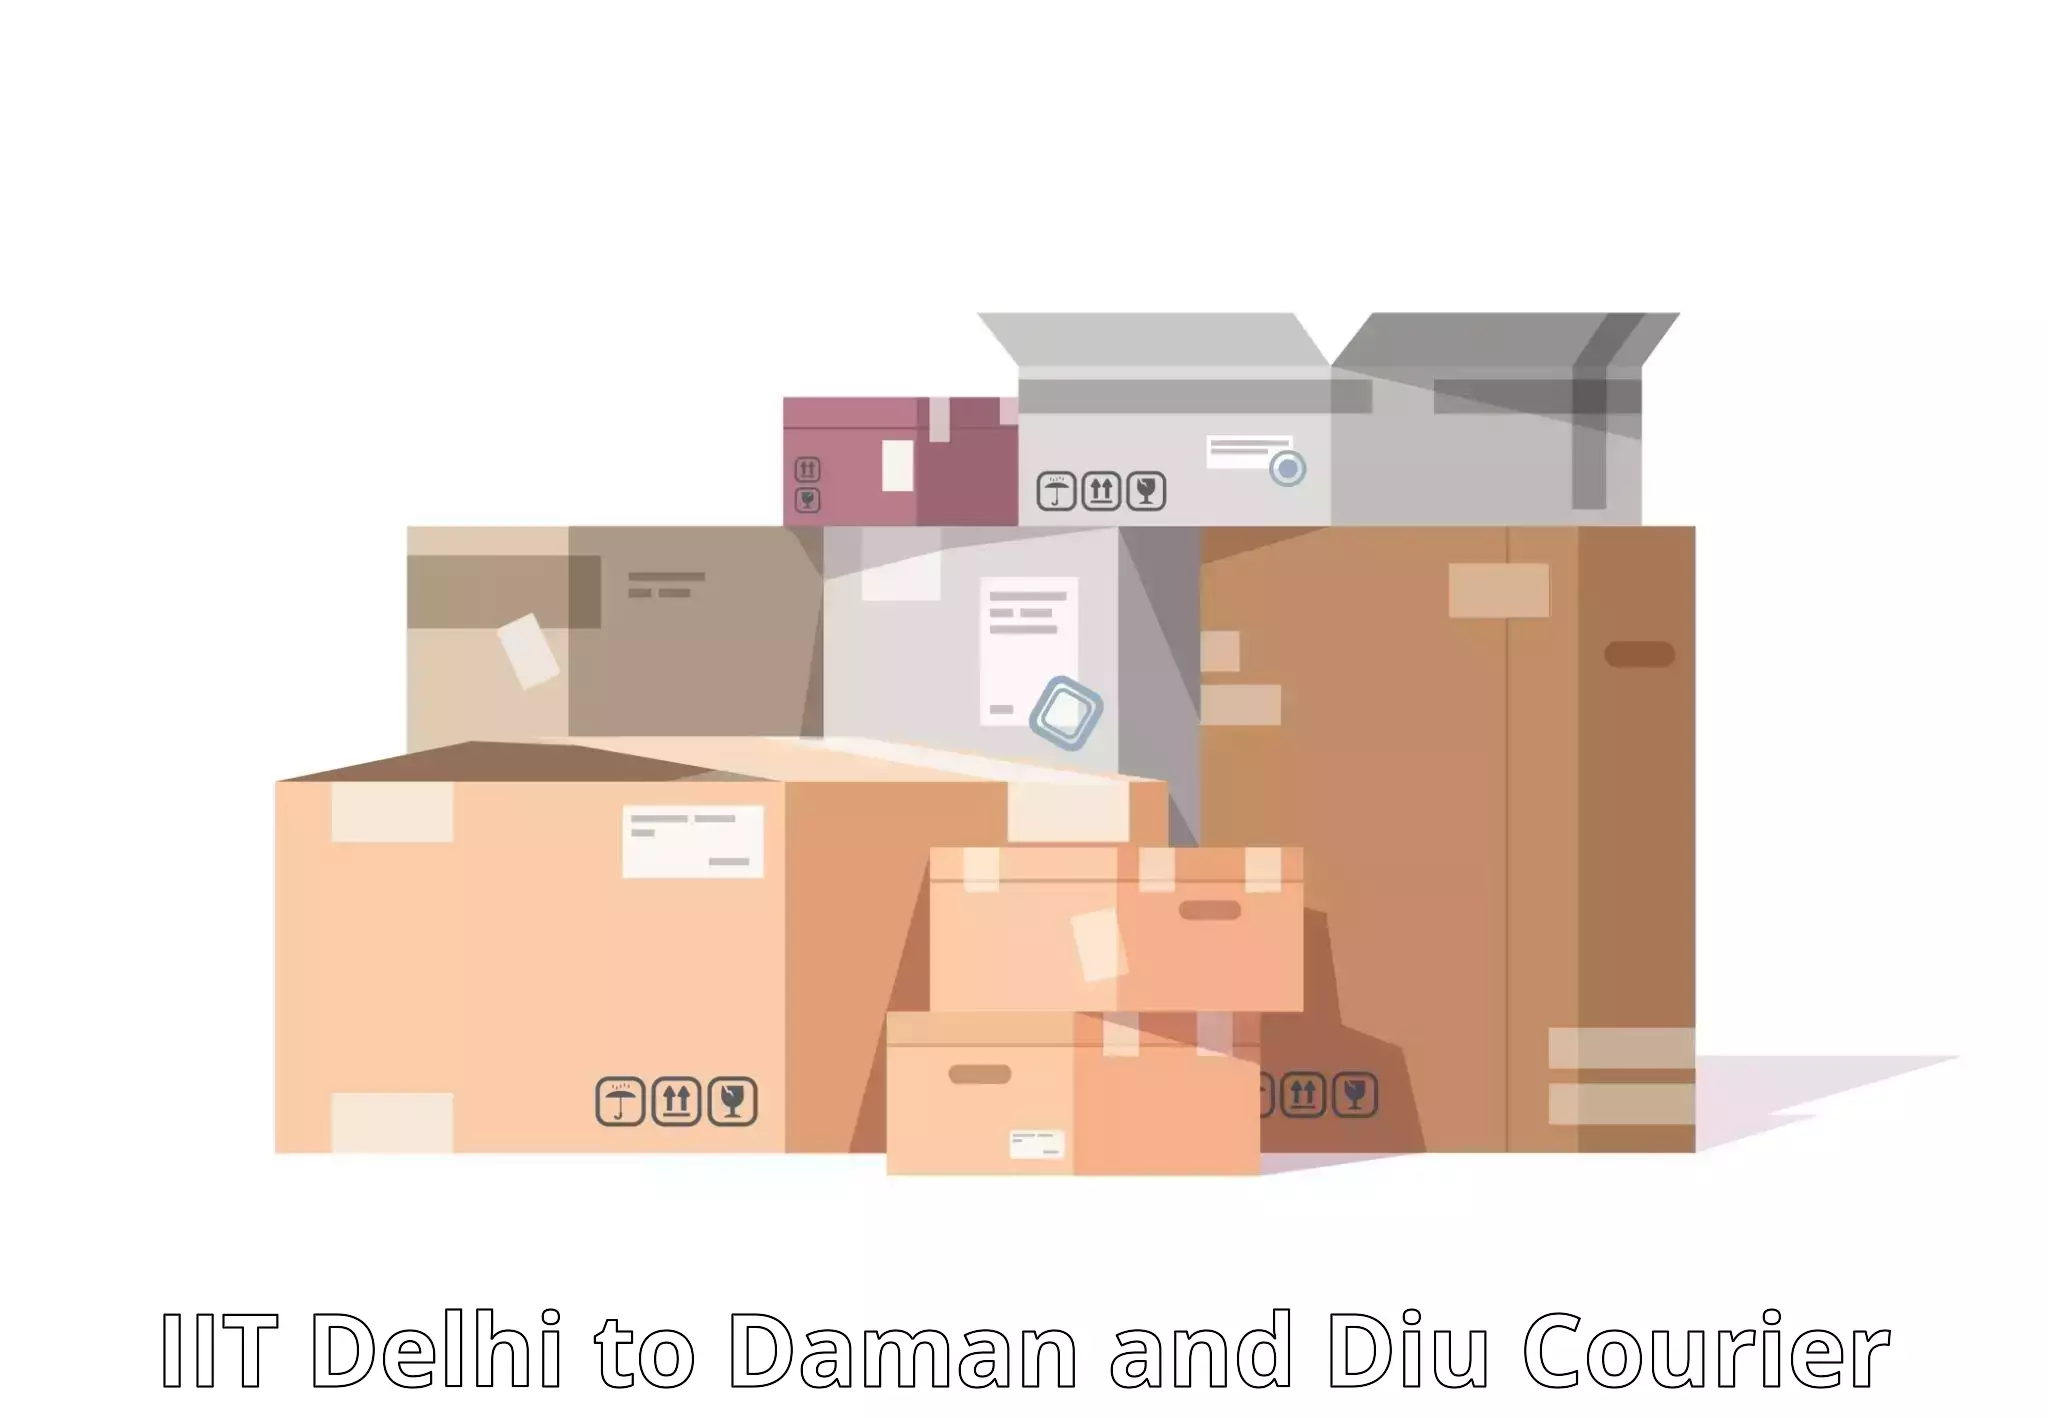 Emergency parcel delivery in IIT Delhi to Daman and Diu